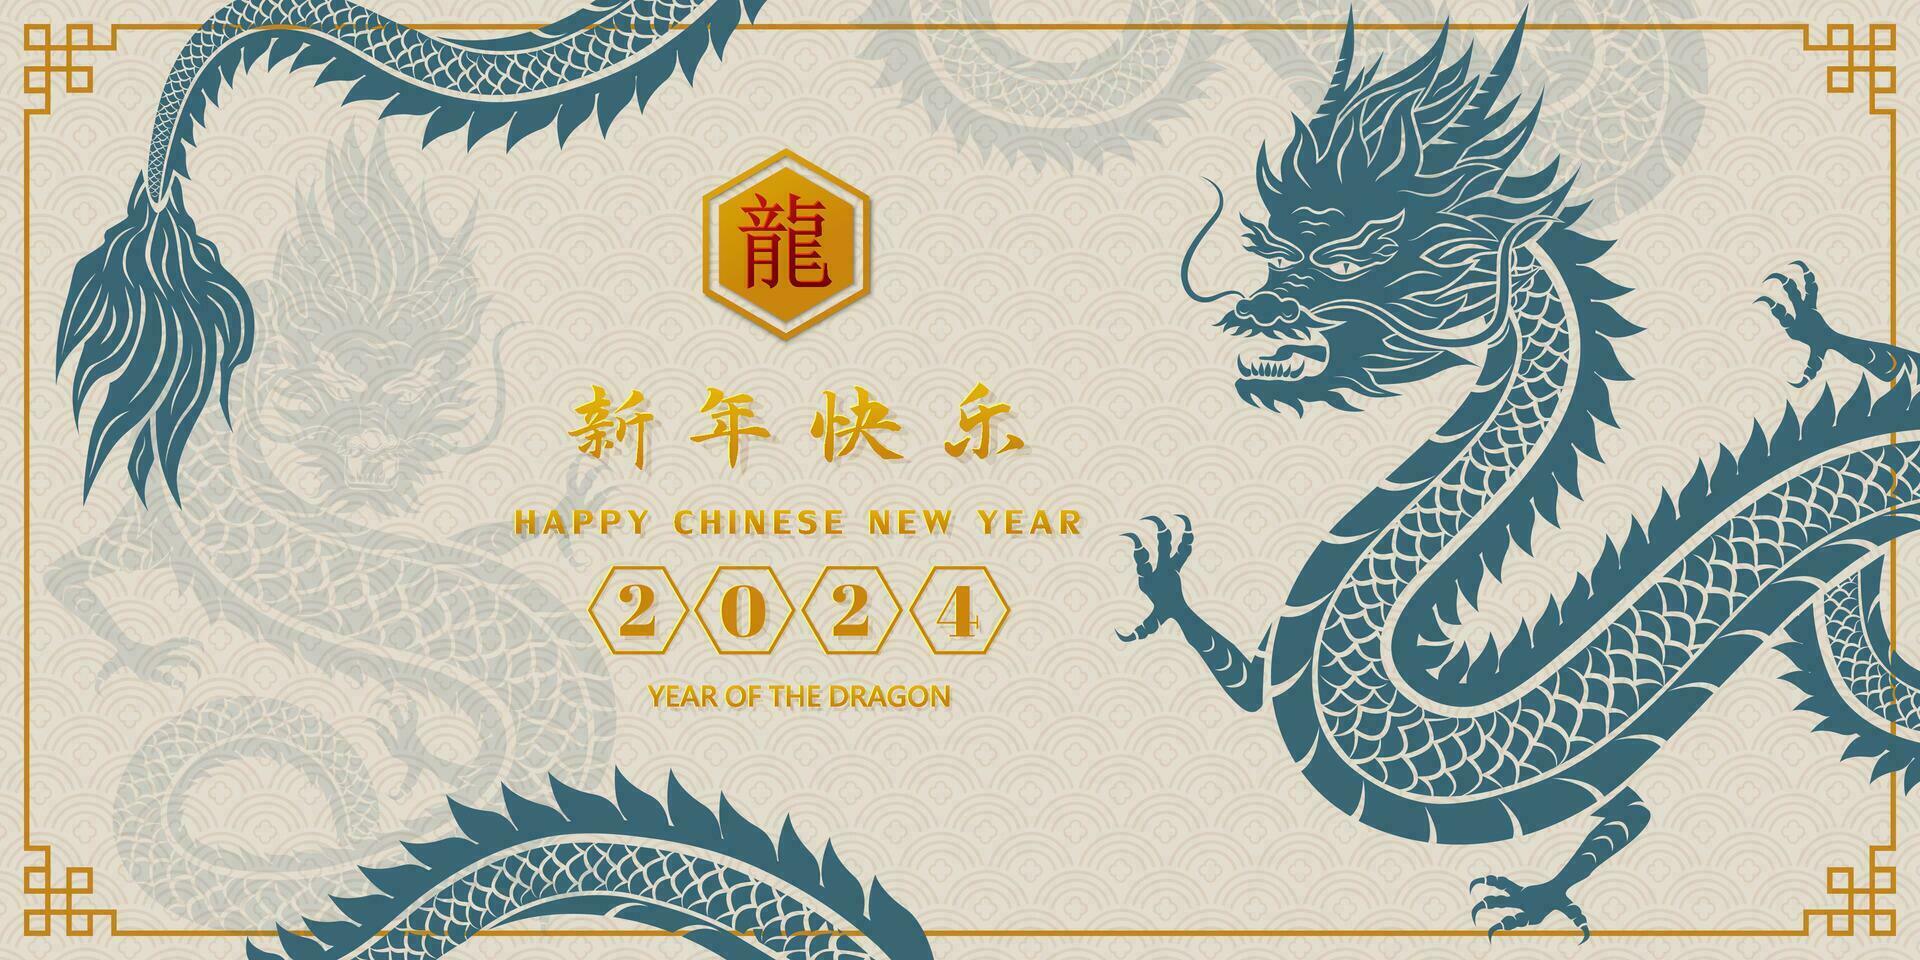 Happy Chinese New Year 2024,celebrate theme with dragon zodiac sign on chinese background,Chinese translate mean happy new year 2024,dragon year vector